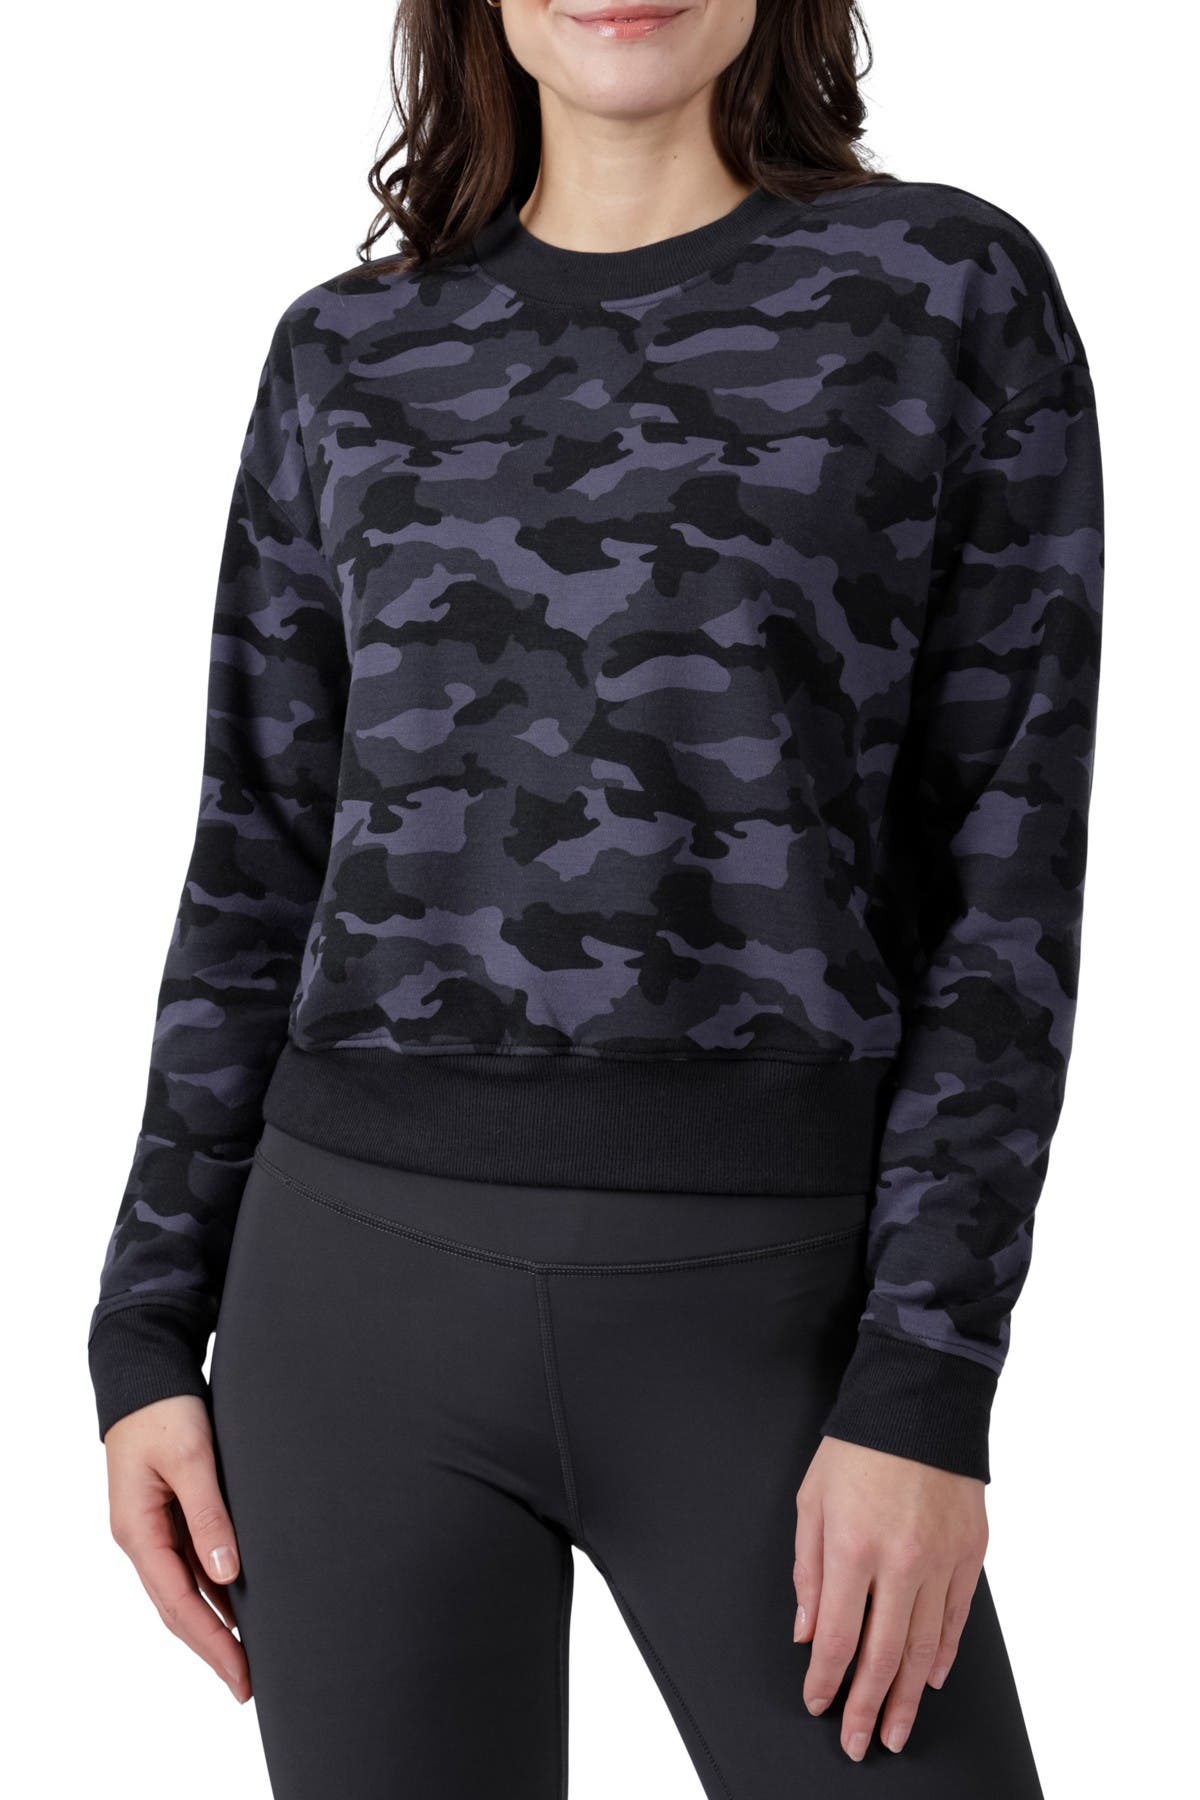 90 Degree By Reflex Missy Terry Brushed Long Sleeve In P600 Camo Navy Comb